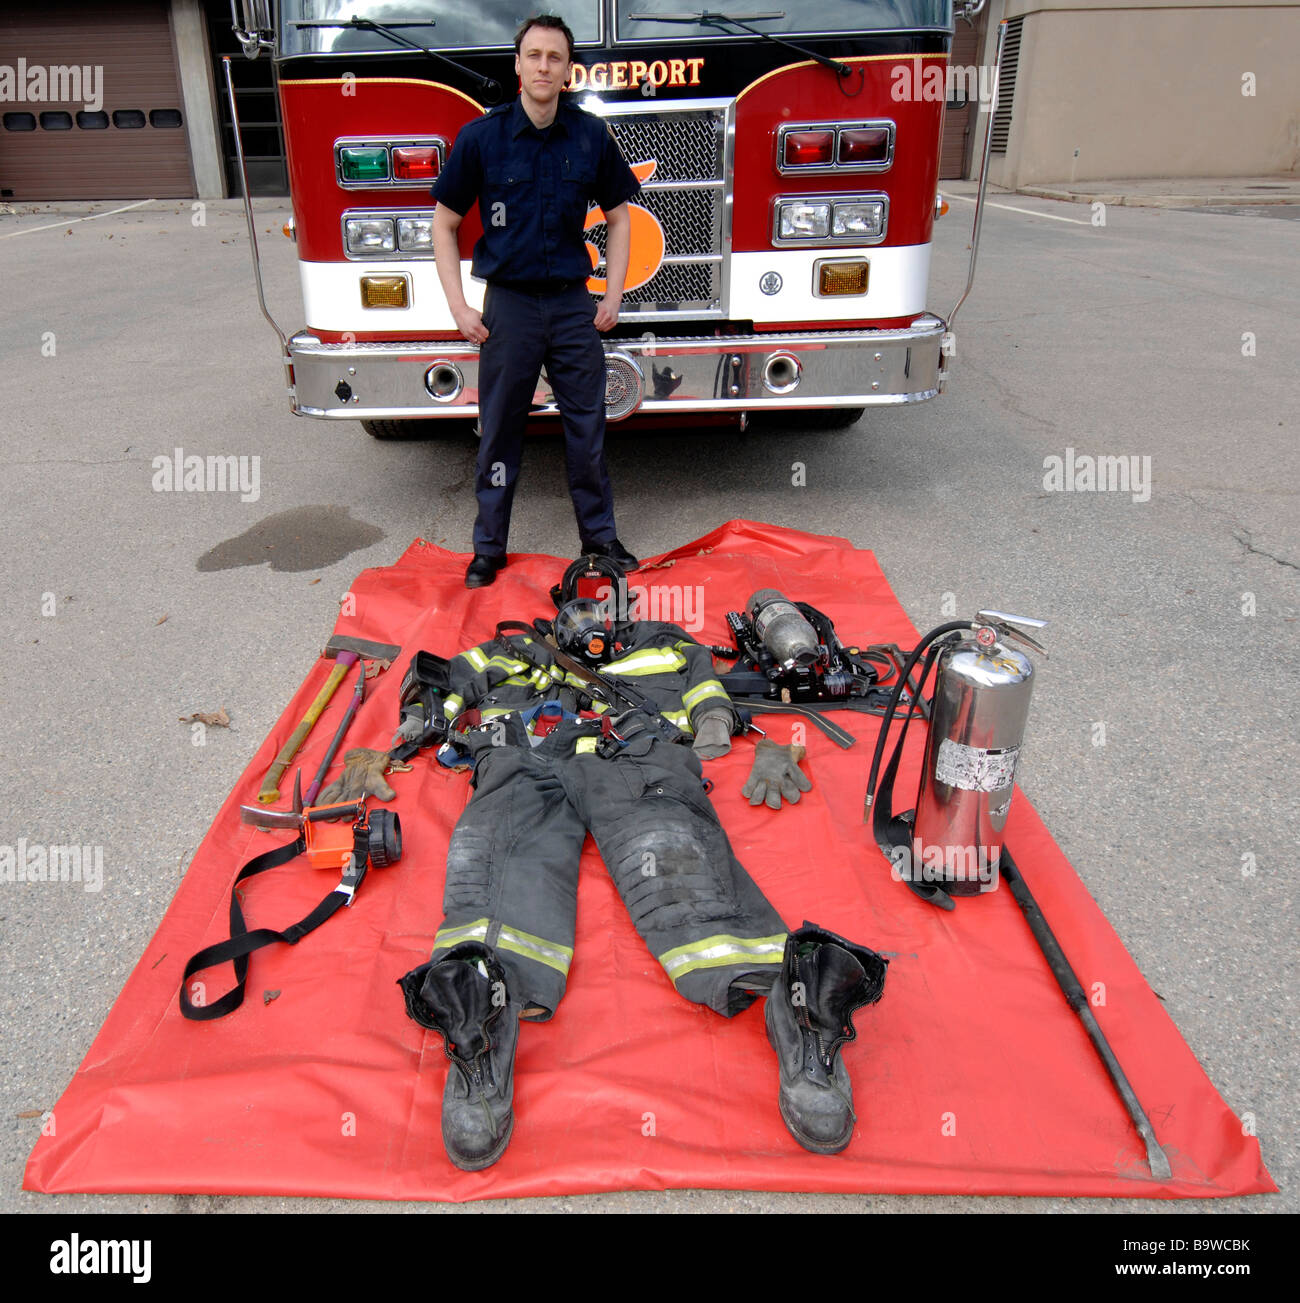 Firefighter with gear he takes on calls laid out in front of him Stock Photo